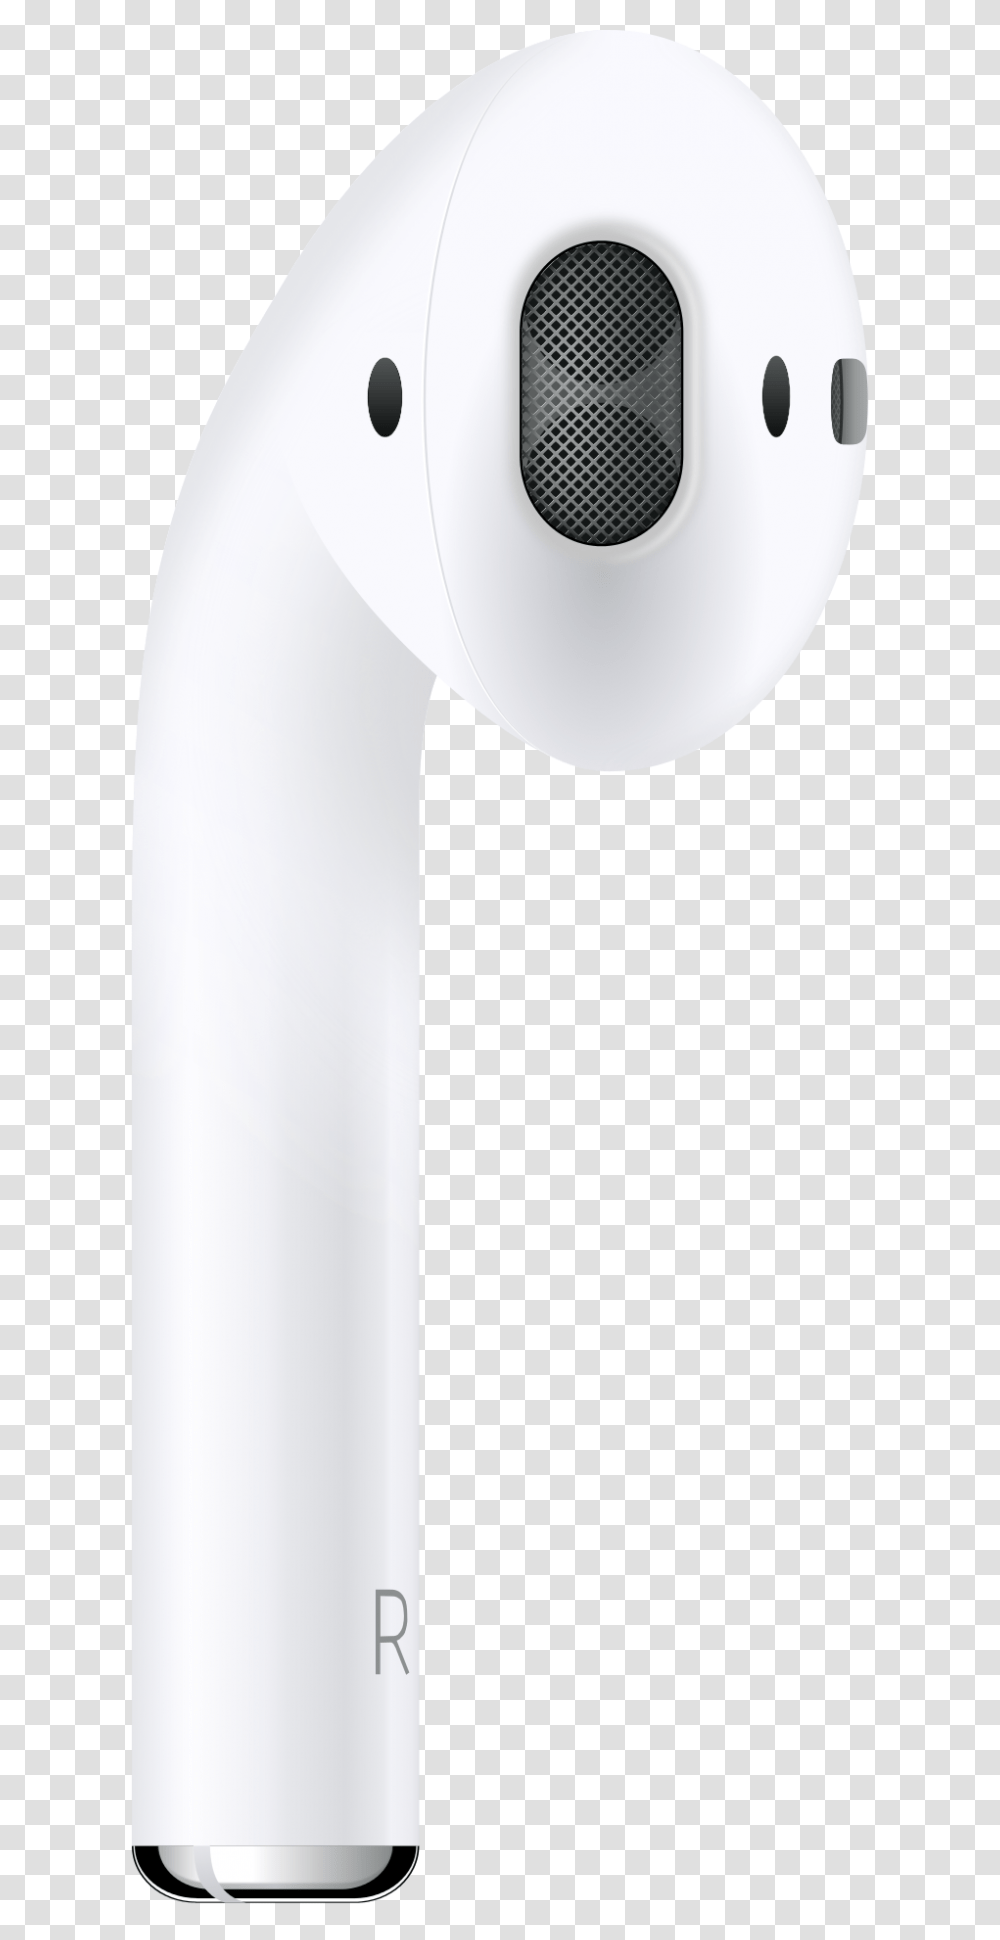 Apple Airpods Airpod Earpod Image Background Airpods, Electronics, Stick, Cane, Camera Transparent Png